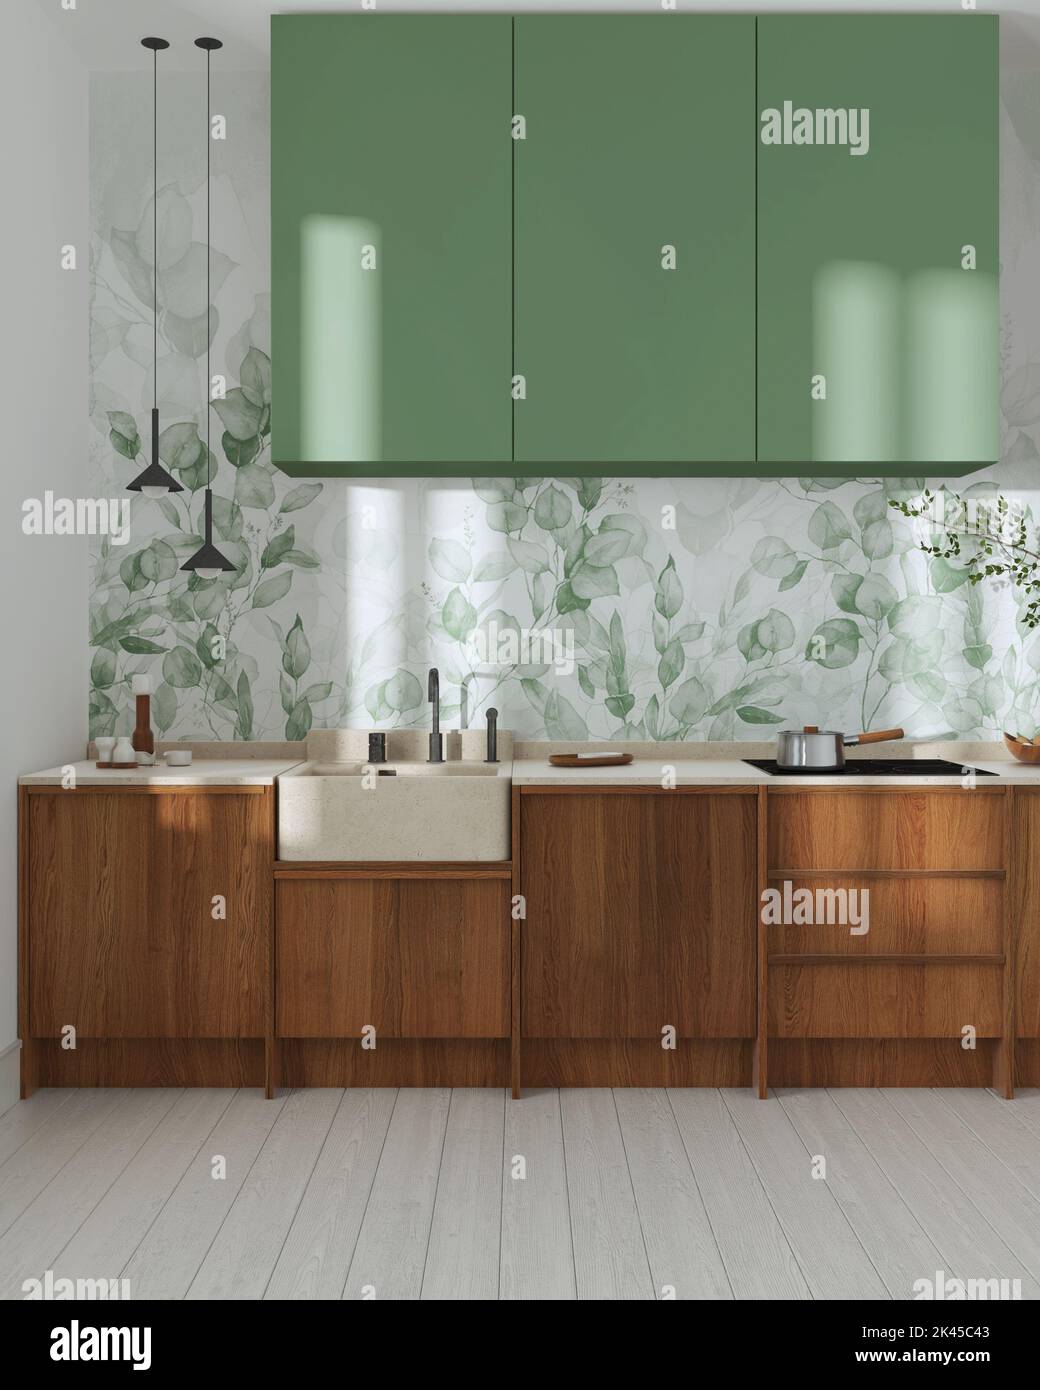 https://c8.alamy.com/comp/2K45C43/japandi-wooden-kitchen-in-white-and-green-tones-wooden-cabinets-contemporary-wallpaper-and-marble-top-front-view-minimalist-interior-design-2K45C43.jpg